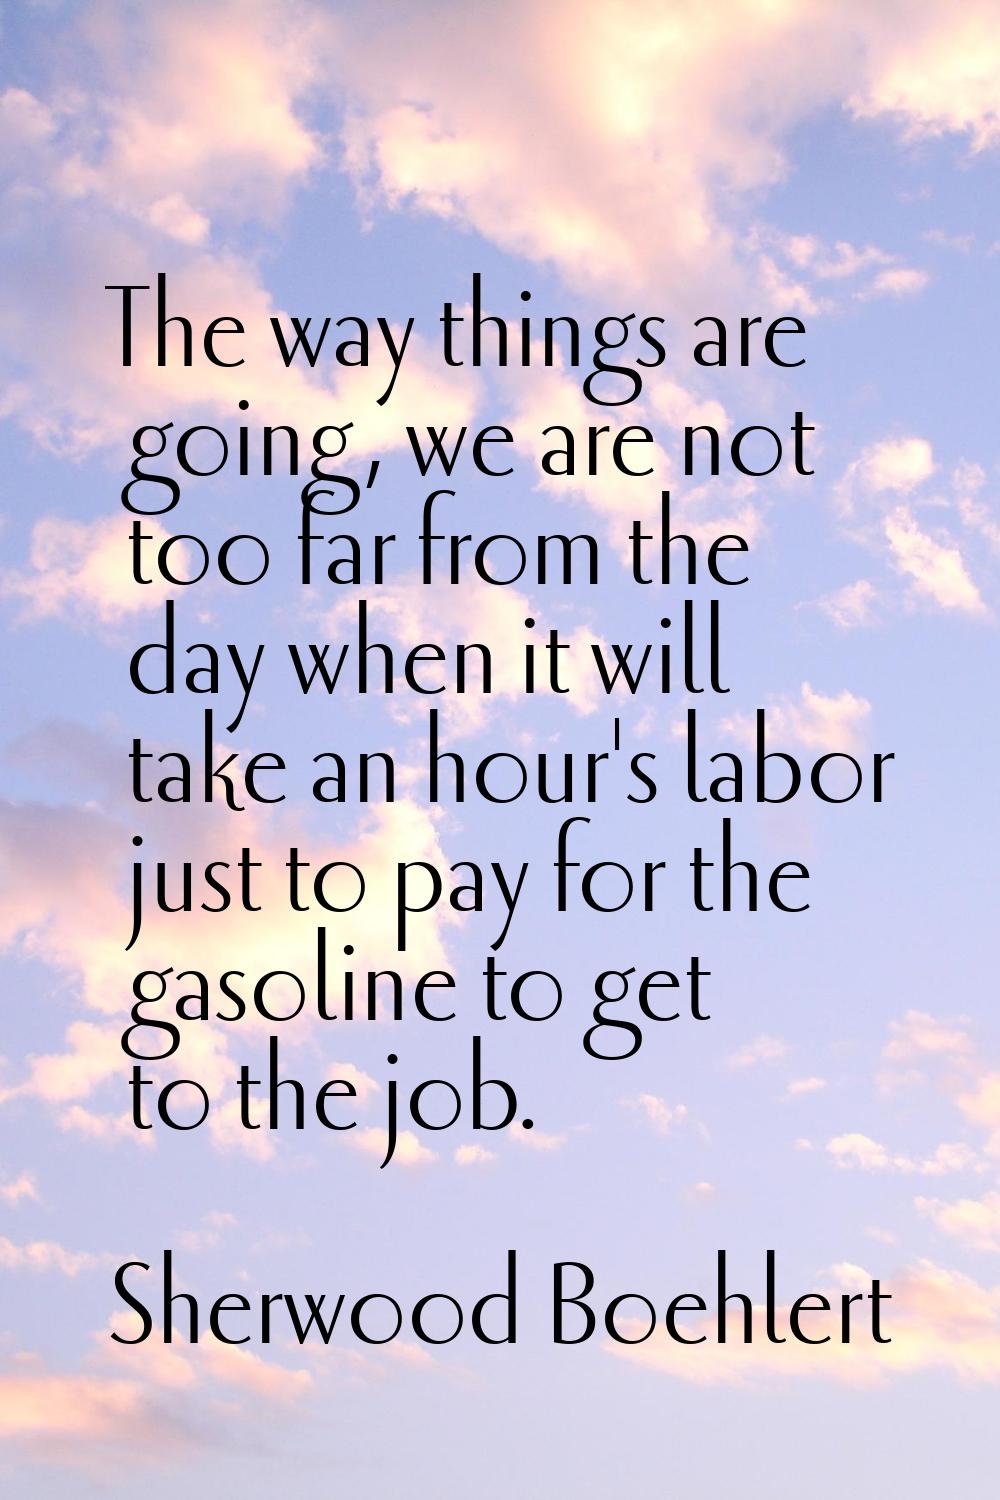 The way things are going, we are not too far from the day when it will take an hour's labor just to